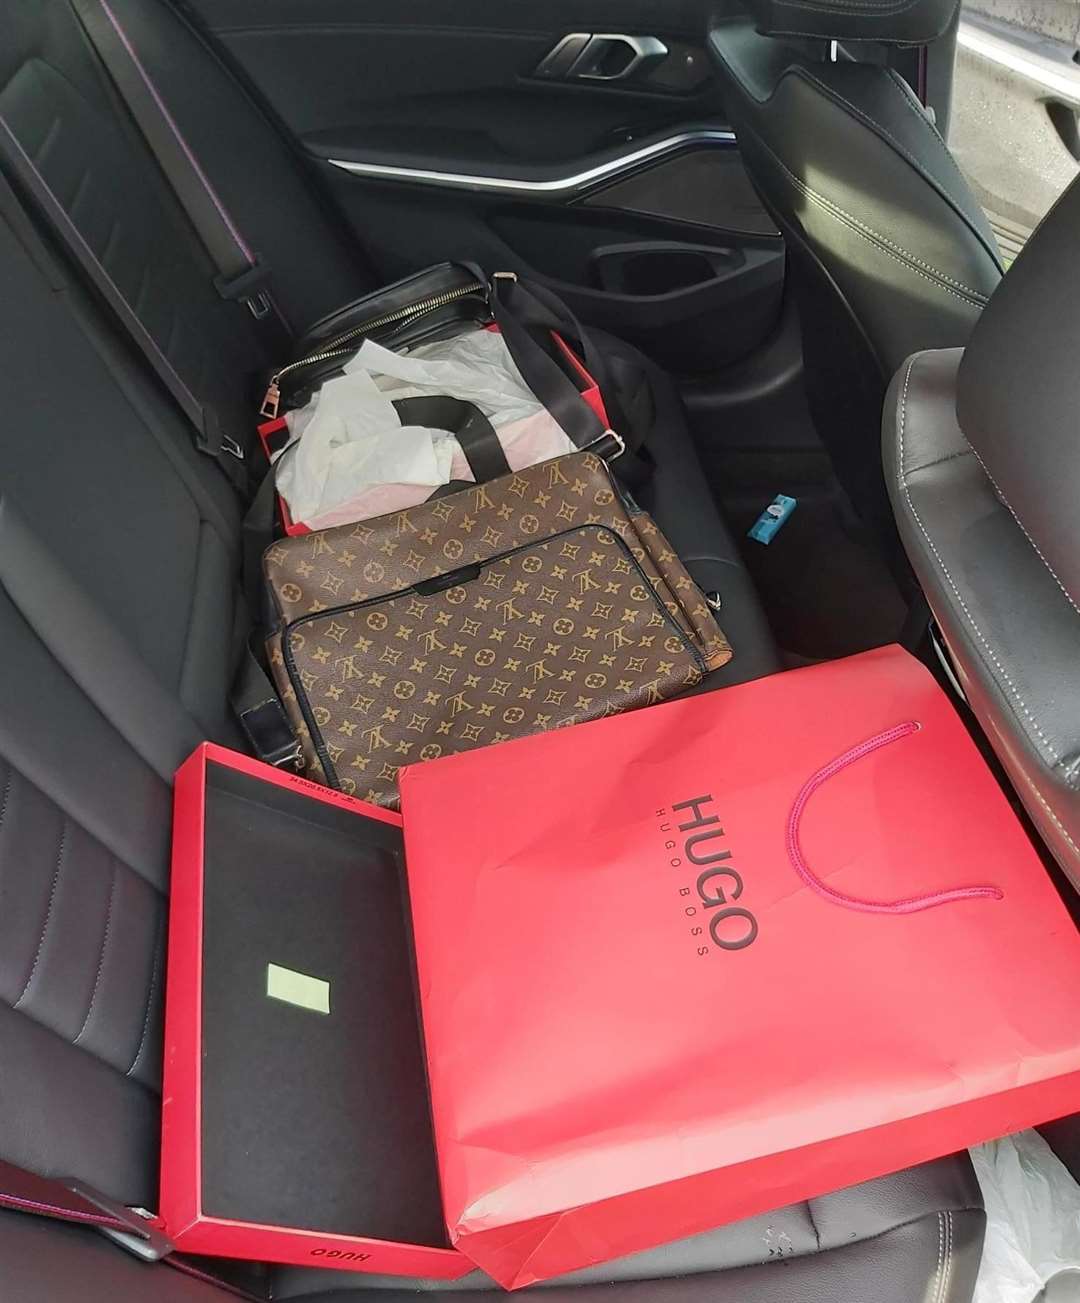 Several items reported stolen were found in the back of the BMW. Picture: Kent Police